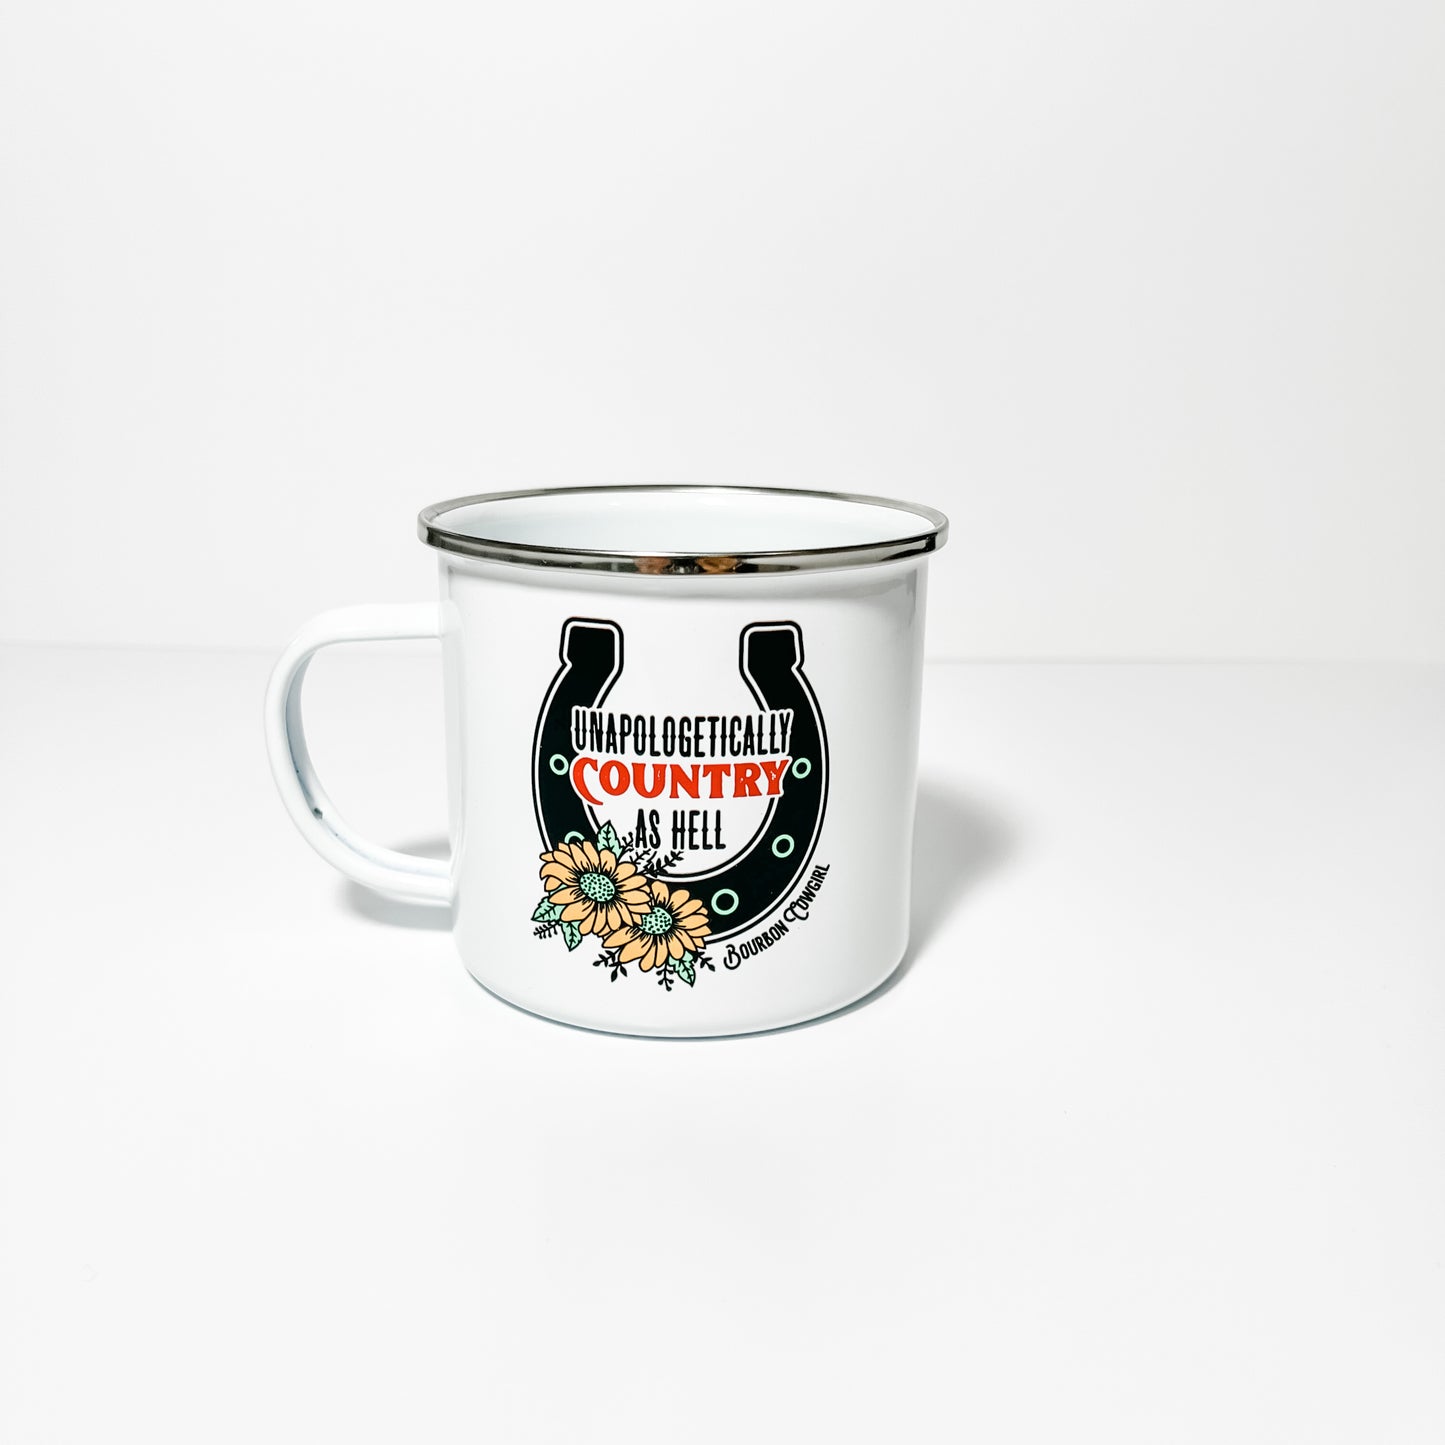 Unapologetically Country as Hell Campfire Mug